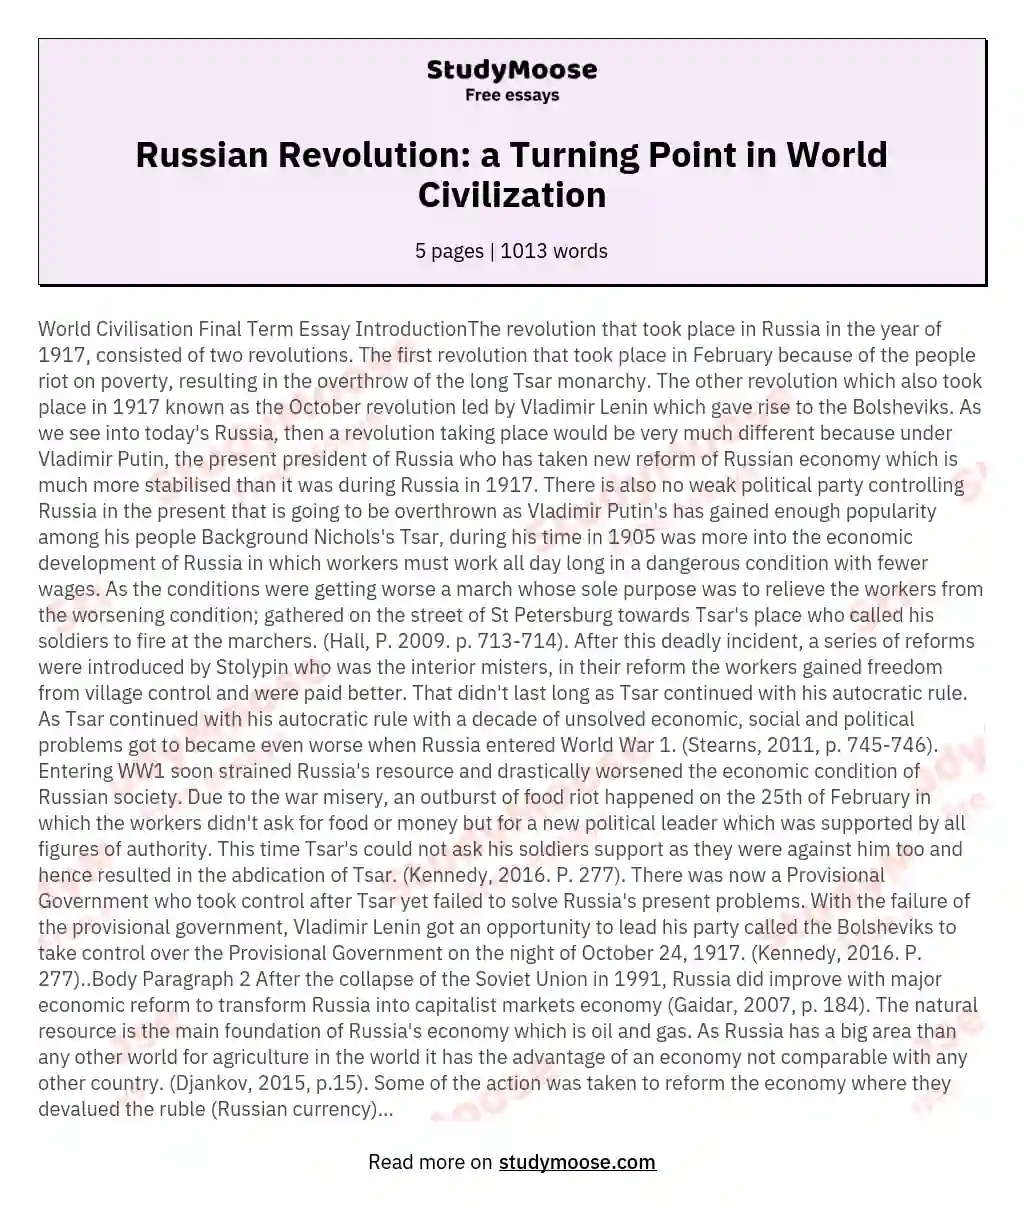 Russian Revolution: a Turning Point in World Civilization essay